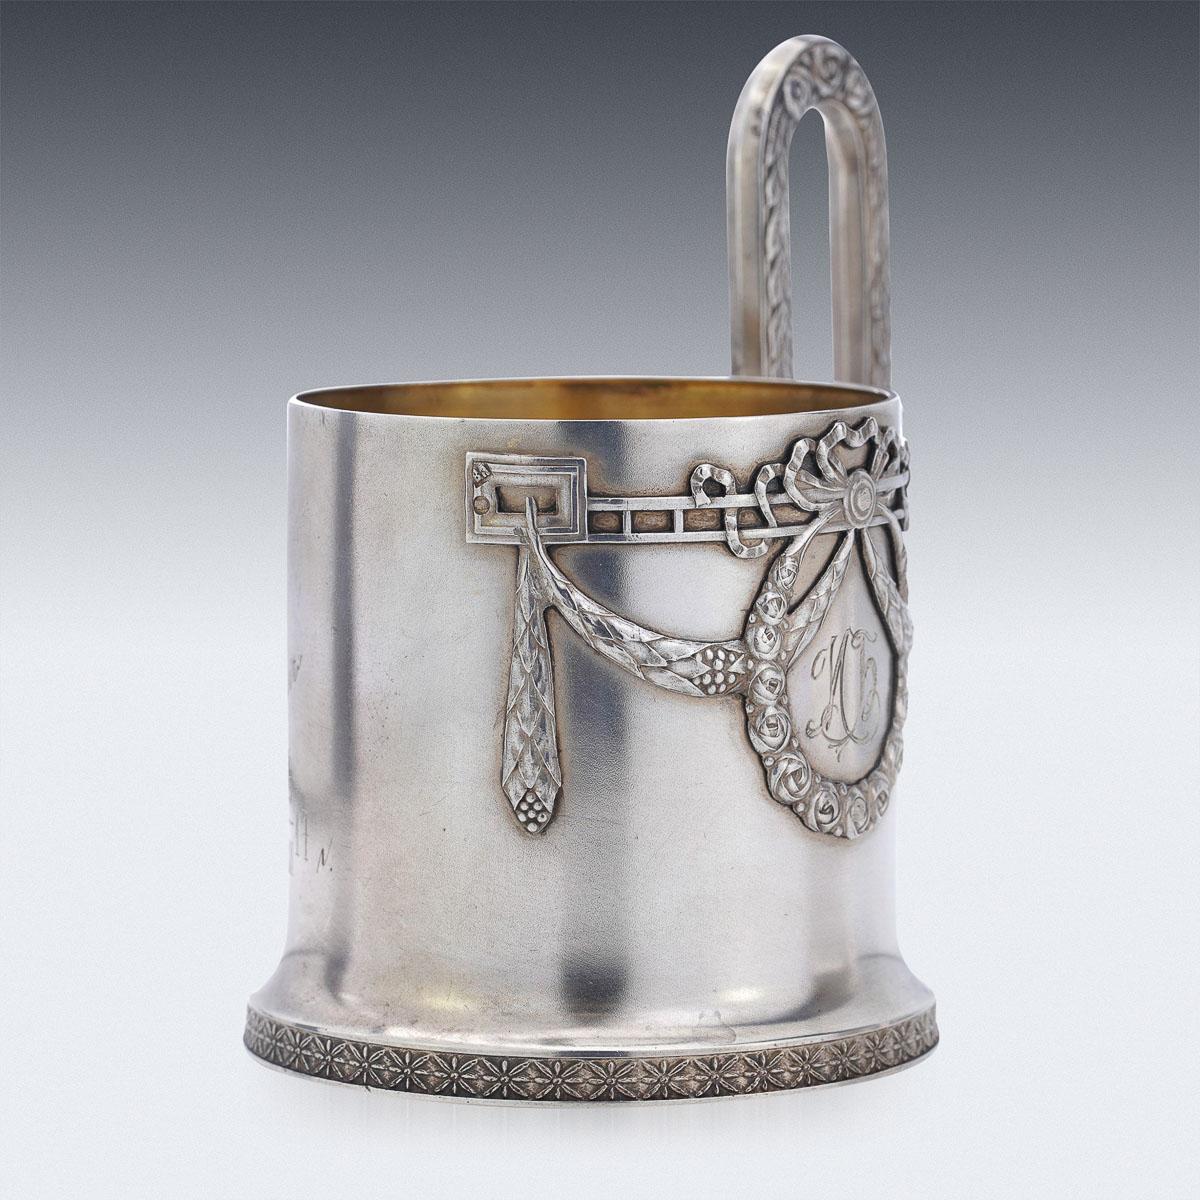 20th century Russian Faberge silver tea glass holder, made in Imperial style, with wreaths and garlands, applied with a solid arching scroll handle decorated with acanthus leaves.
Hallmarked silver 84 (875 standard), Moscow, c.1900, Maker Vasiliy